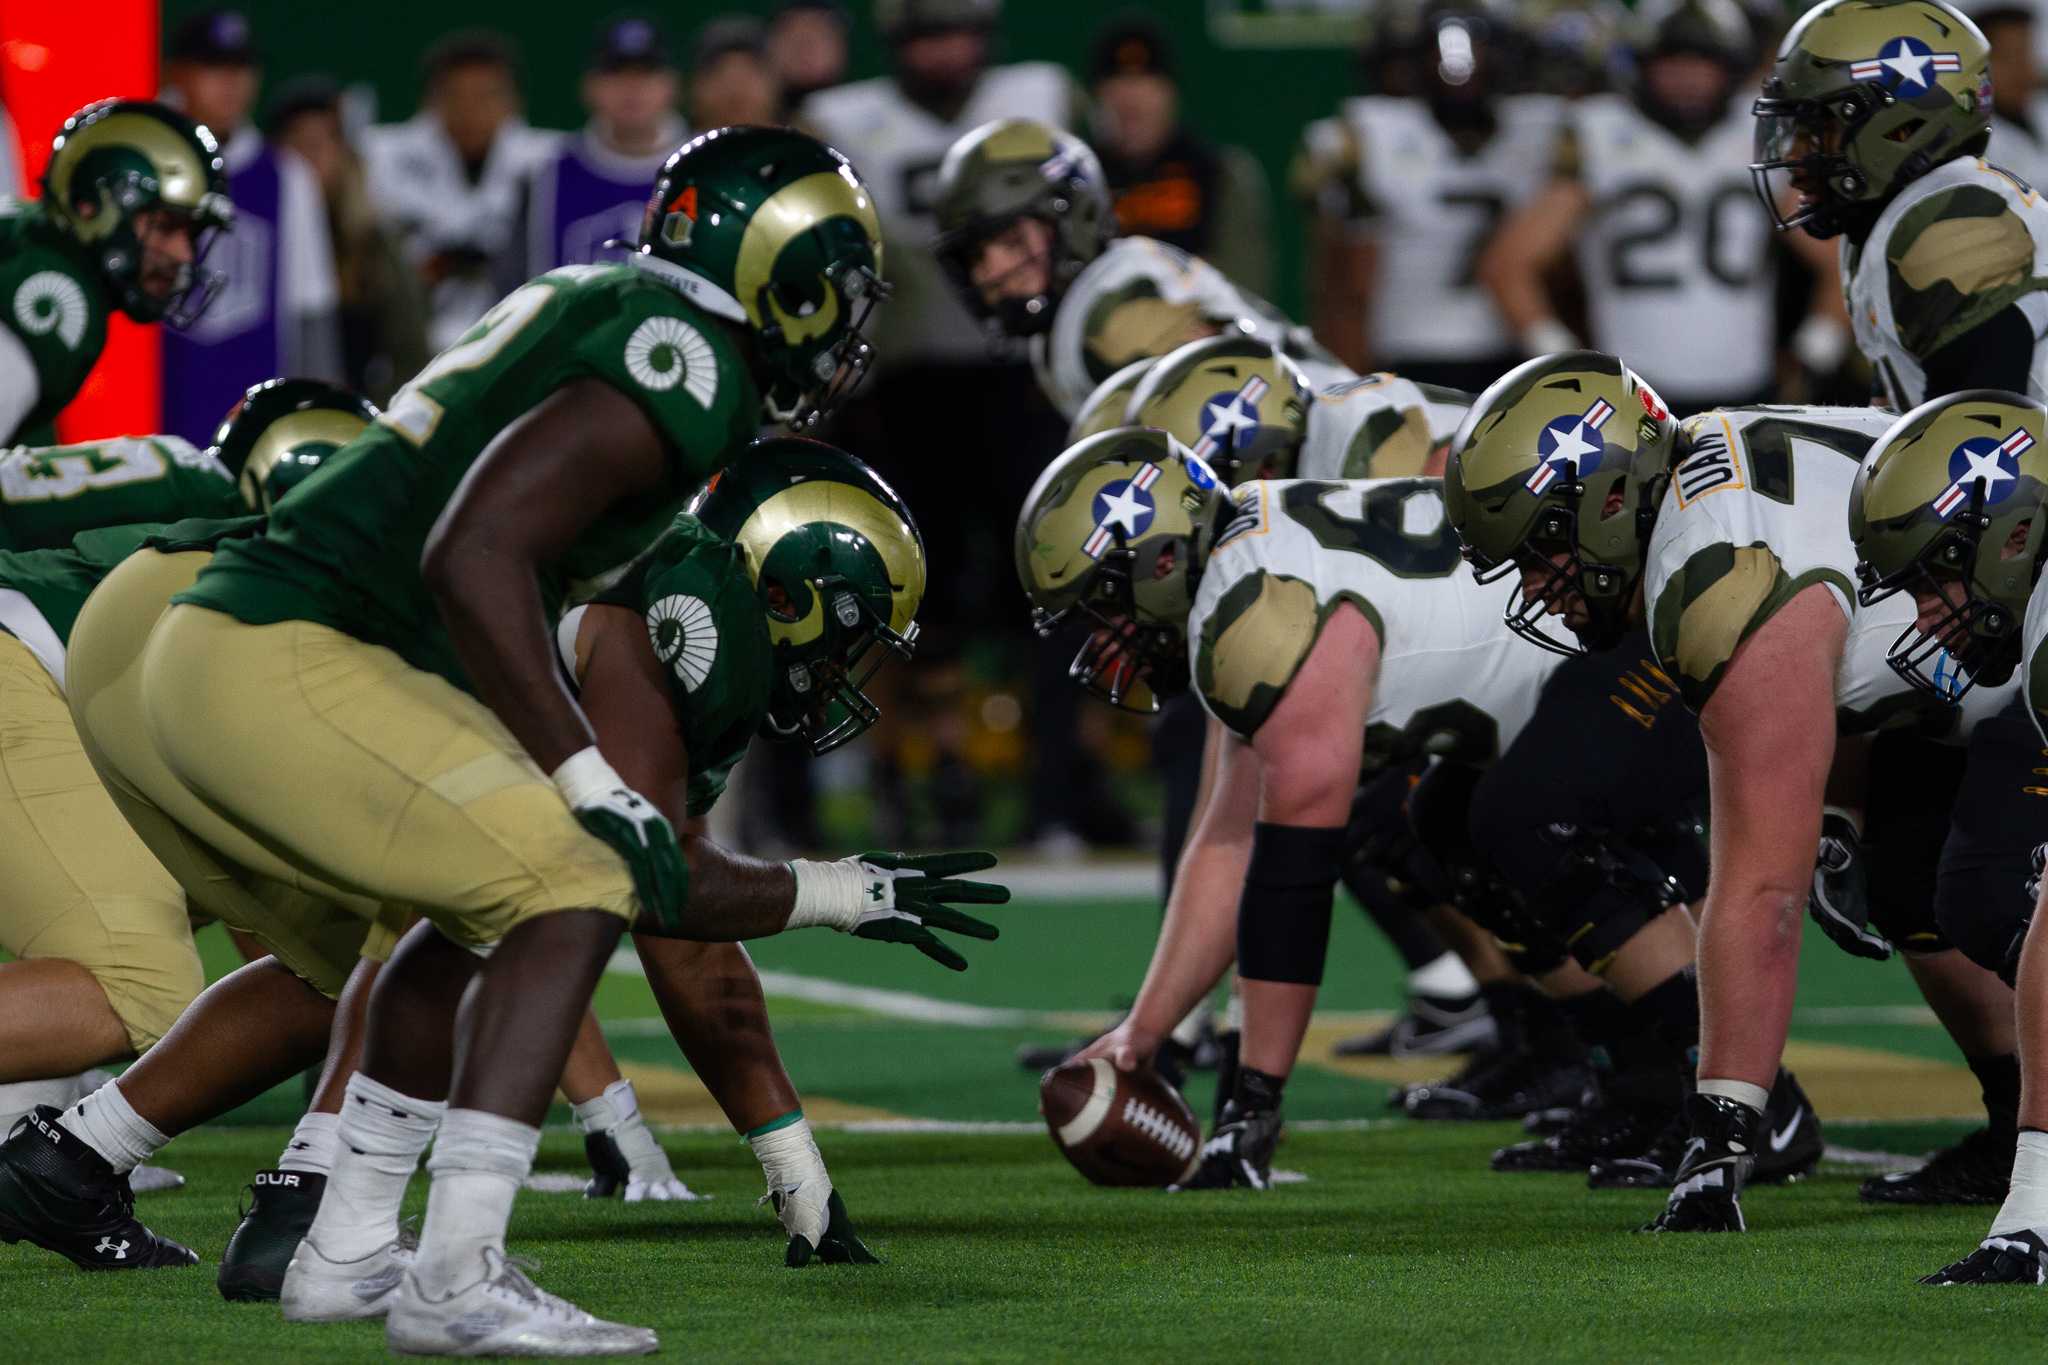 The offensive and defensive lines of Air Force Academy and Colorado State Nov. 13.